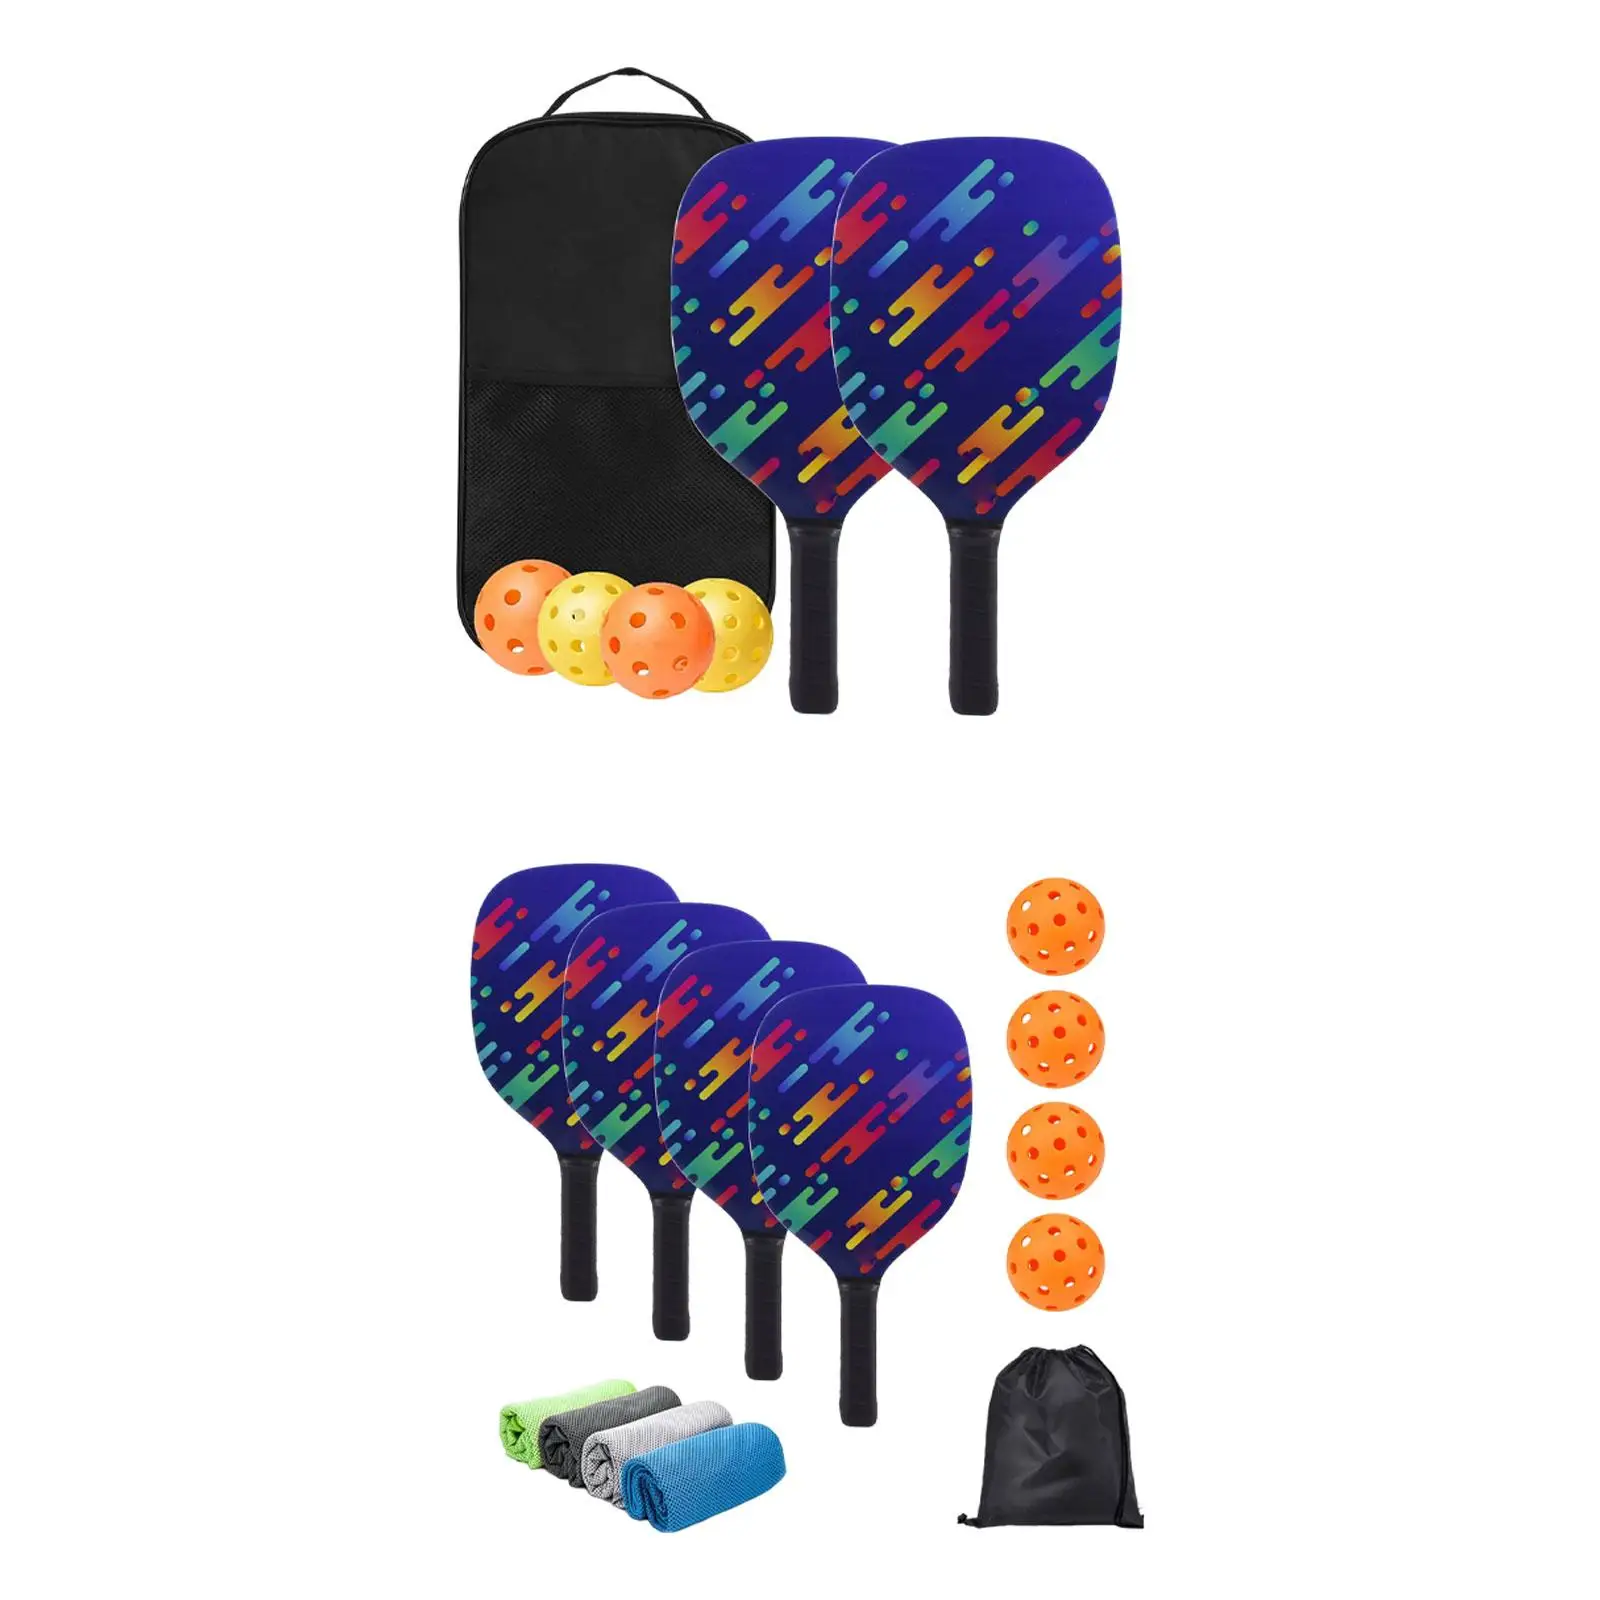 Portable Pickleball Paddles Set with Balls Pickleball Set for Indoor Outdoor